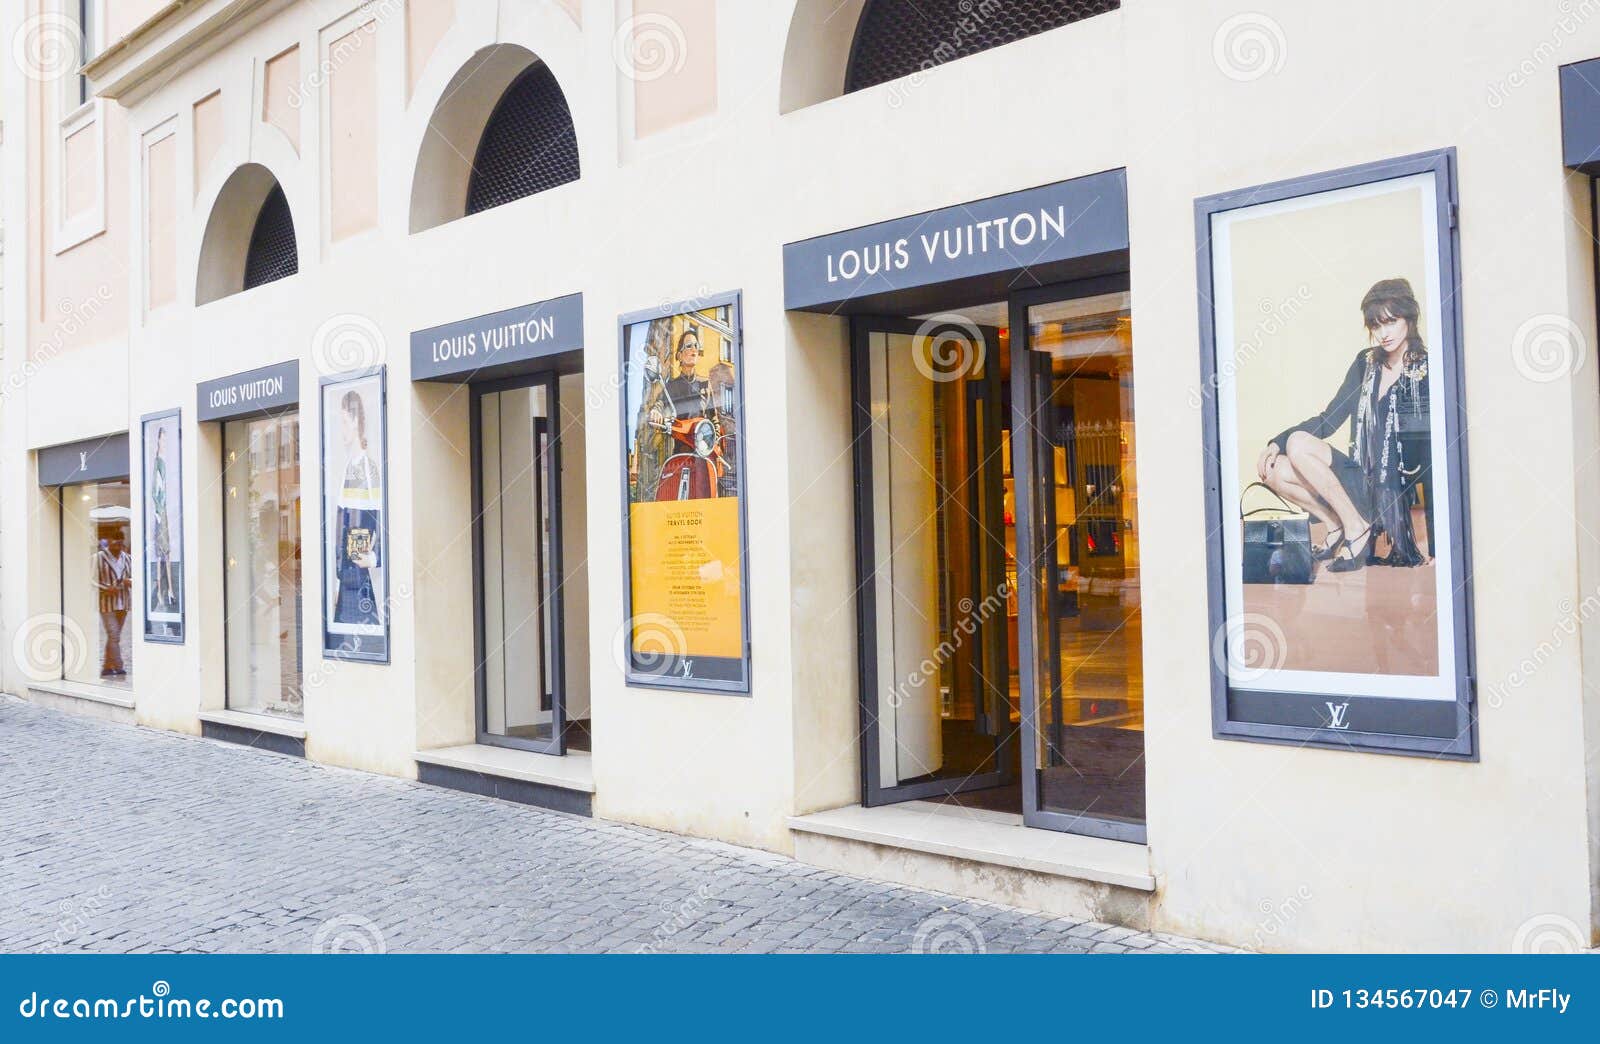 Louis Vuitton Shop, Rome, Italy Editorial Photography - Image of 1854,  view: 134567047